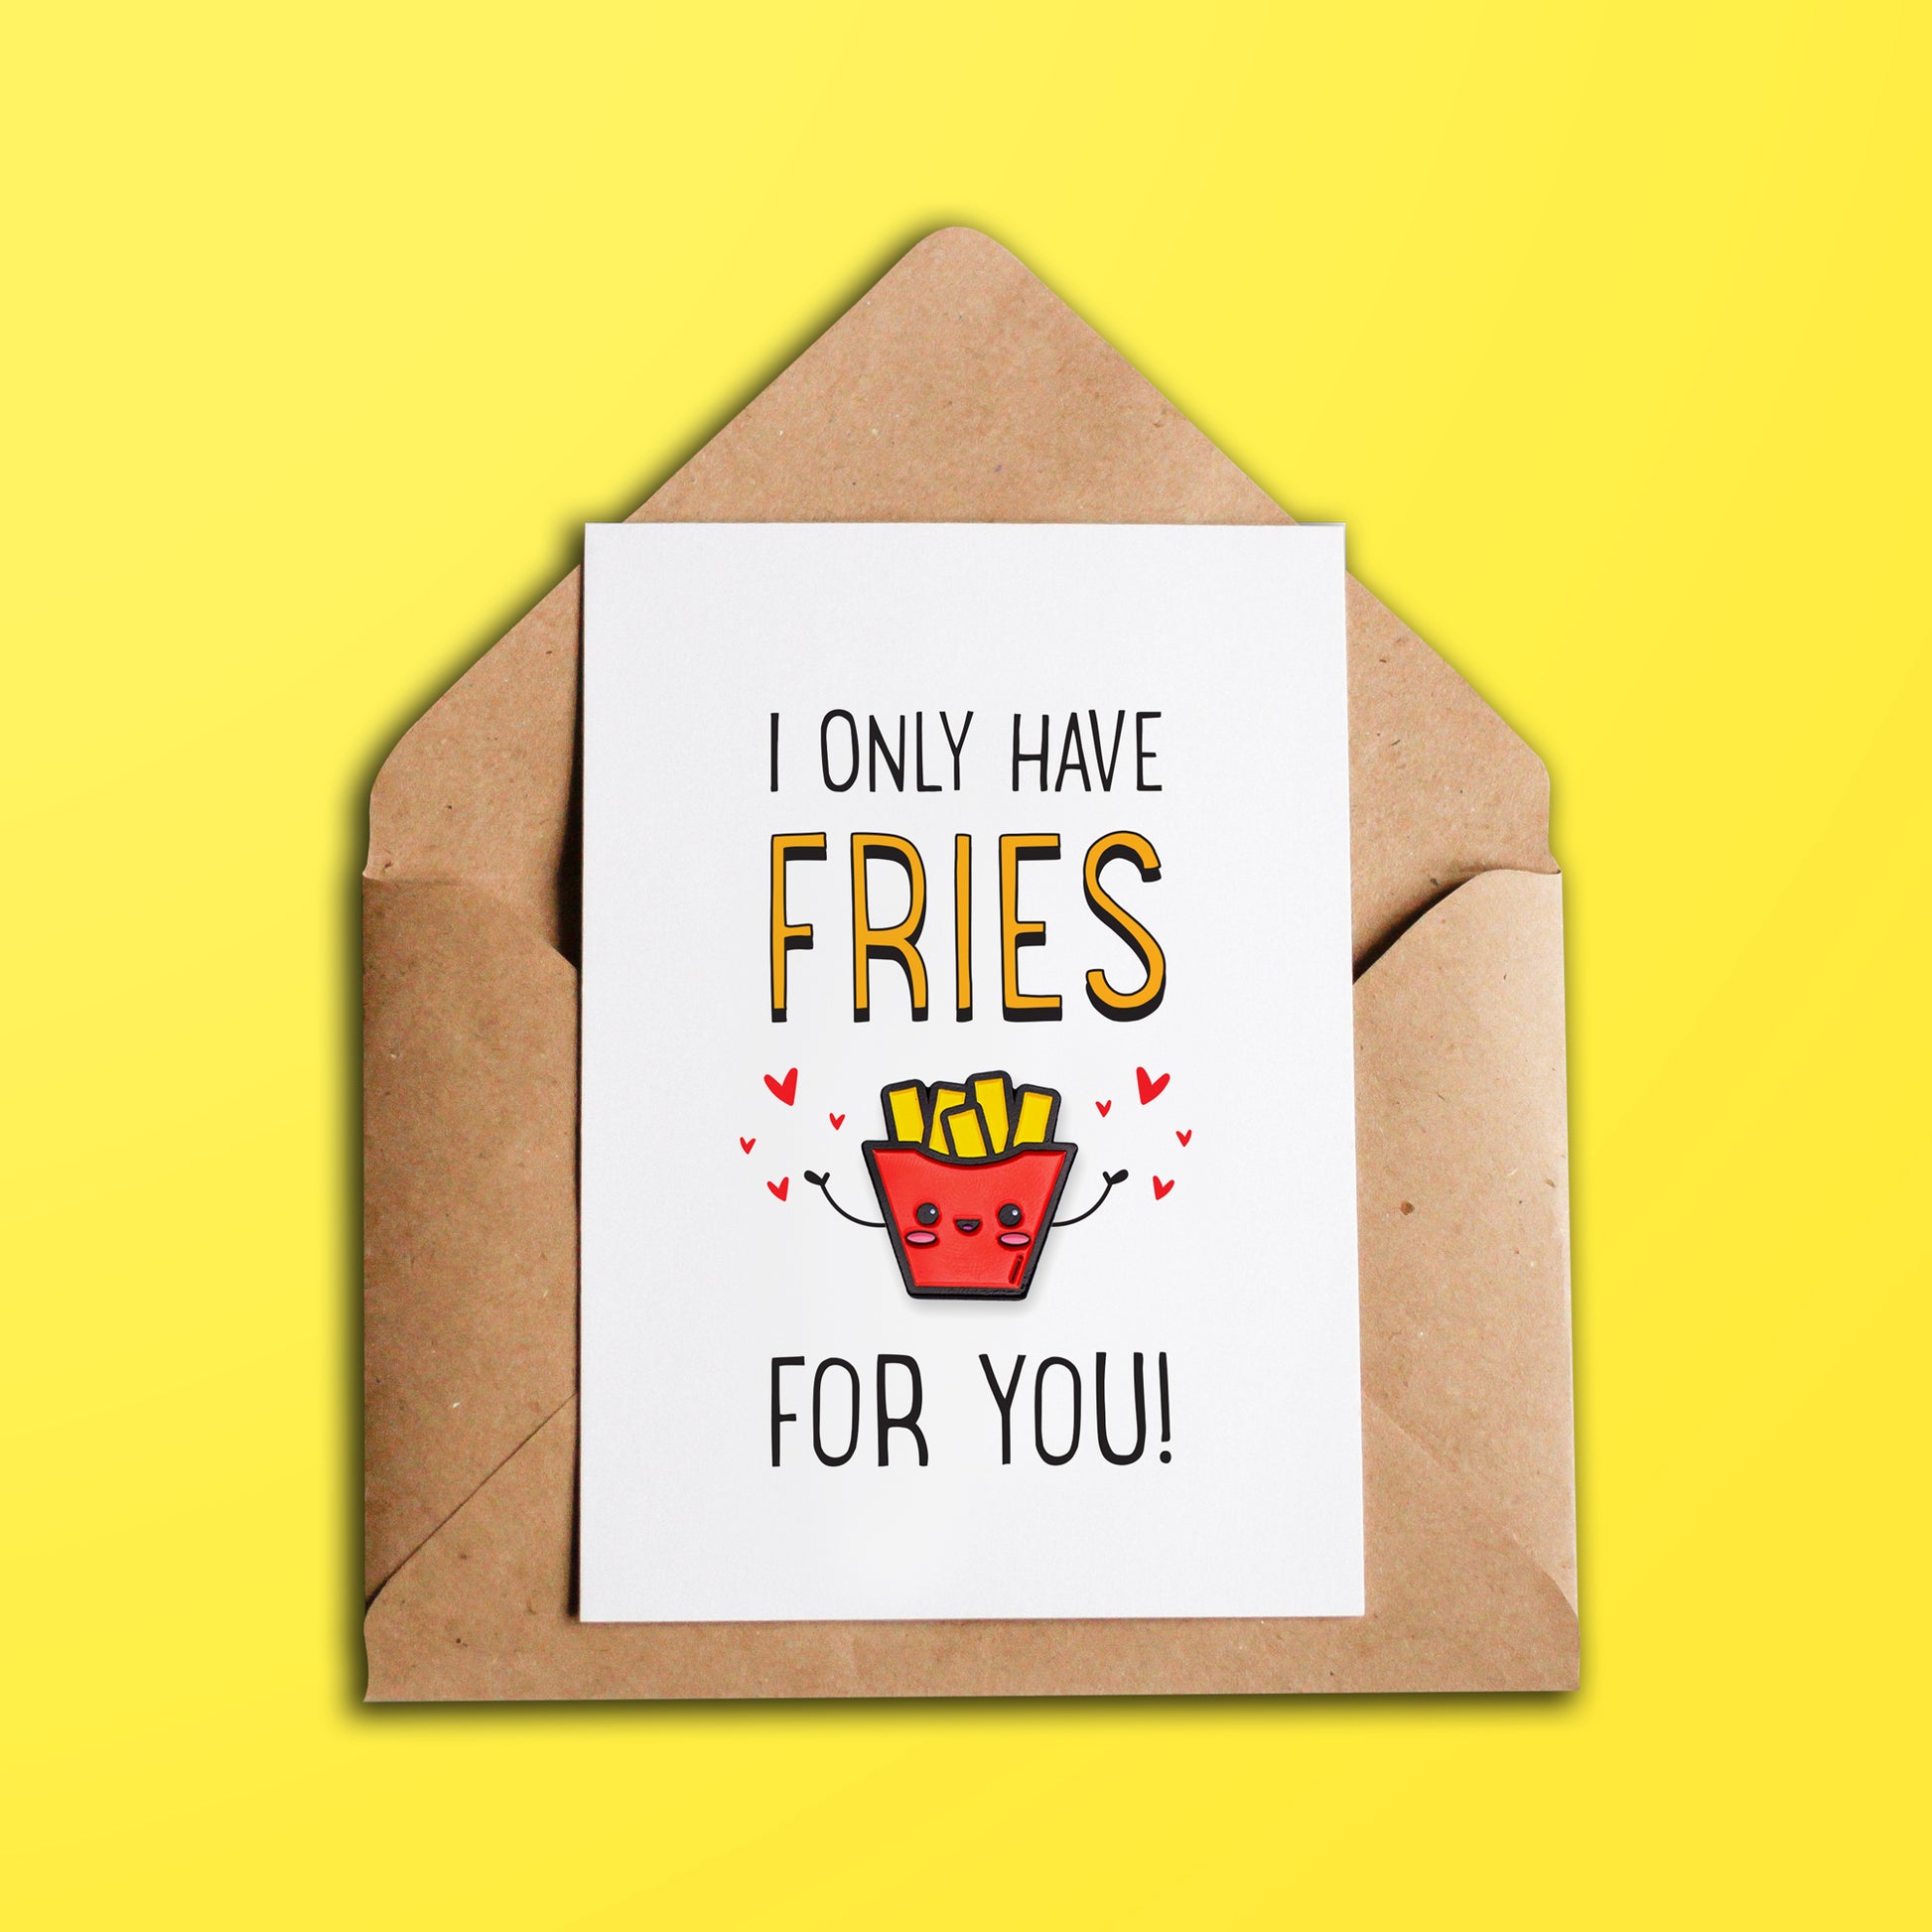 I Only Have Fries For You greeting card over kraft brown envelope on yellow background